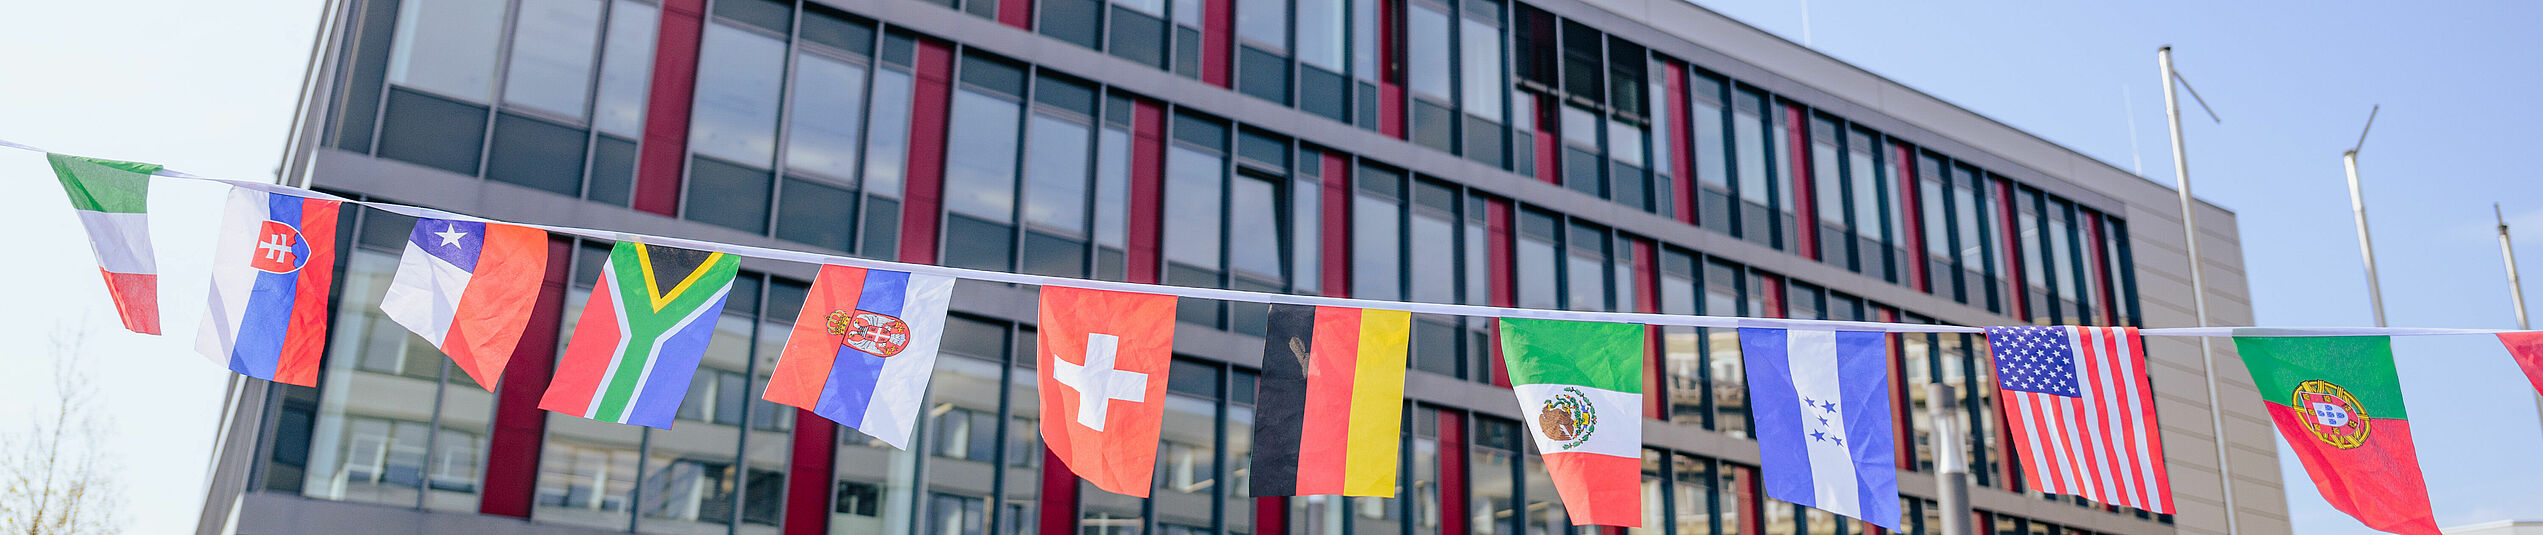 Ten different small country flags hung on a string, in the background the building I of Paderborn University.